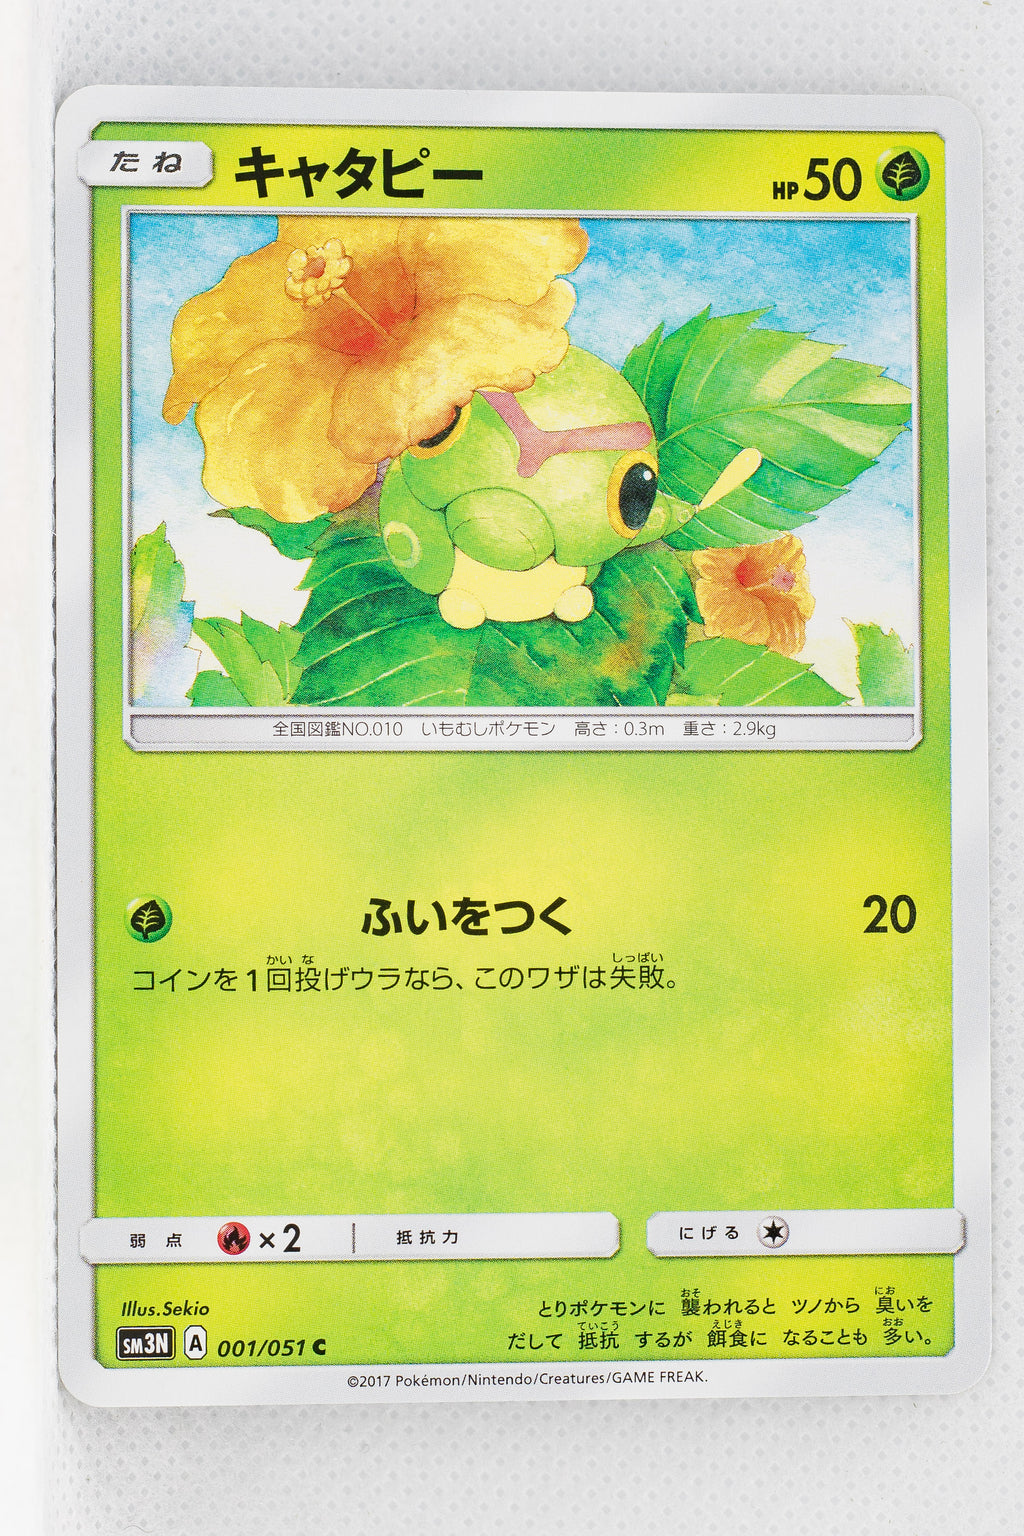 SM3N Darkness Consumes Light 001/051 Caterpie